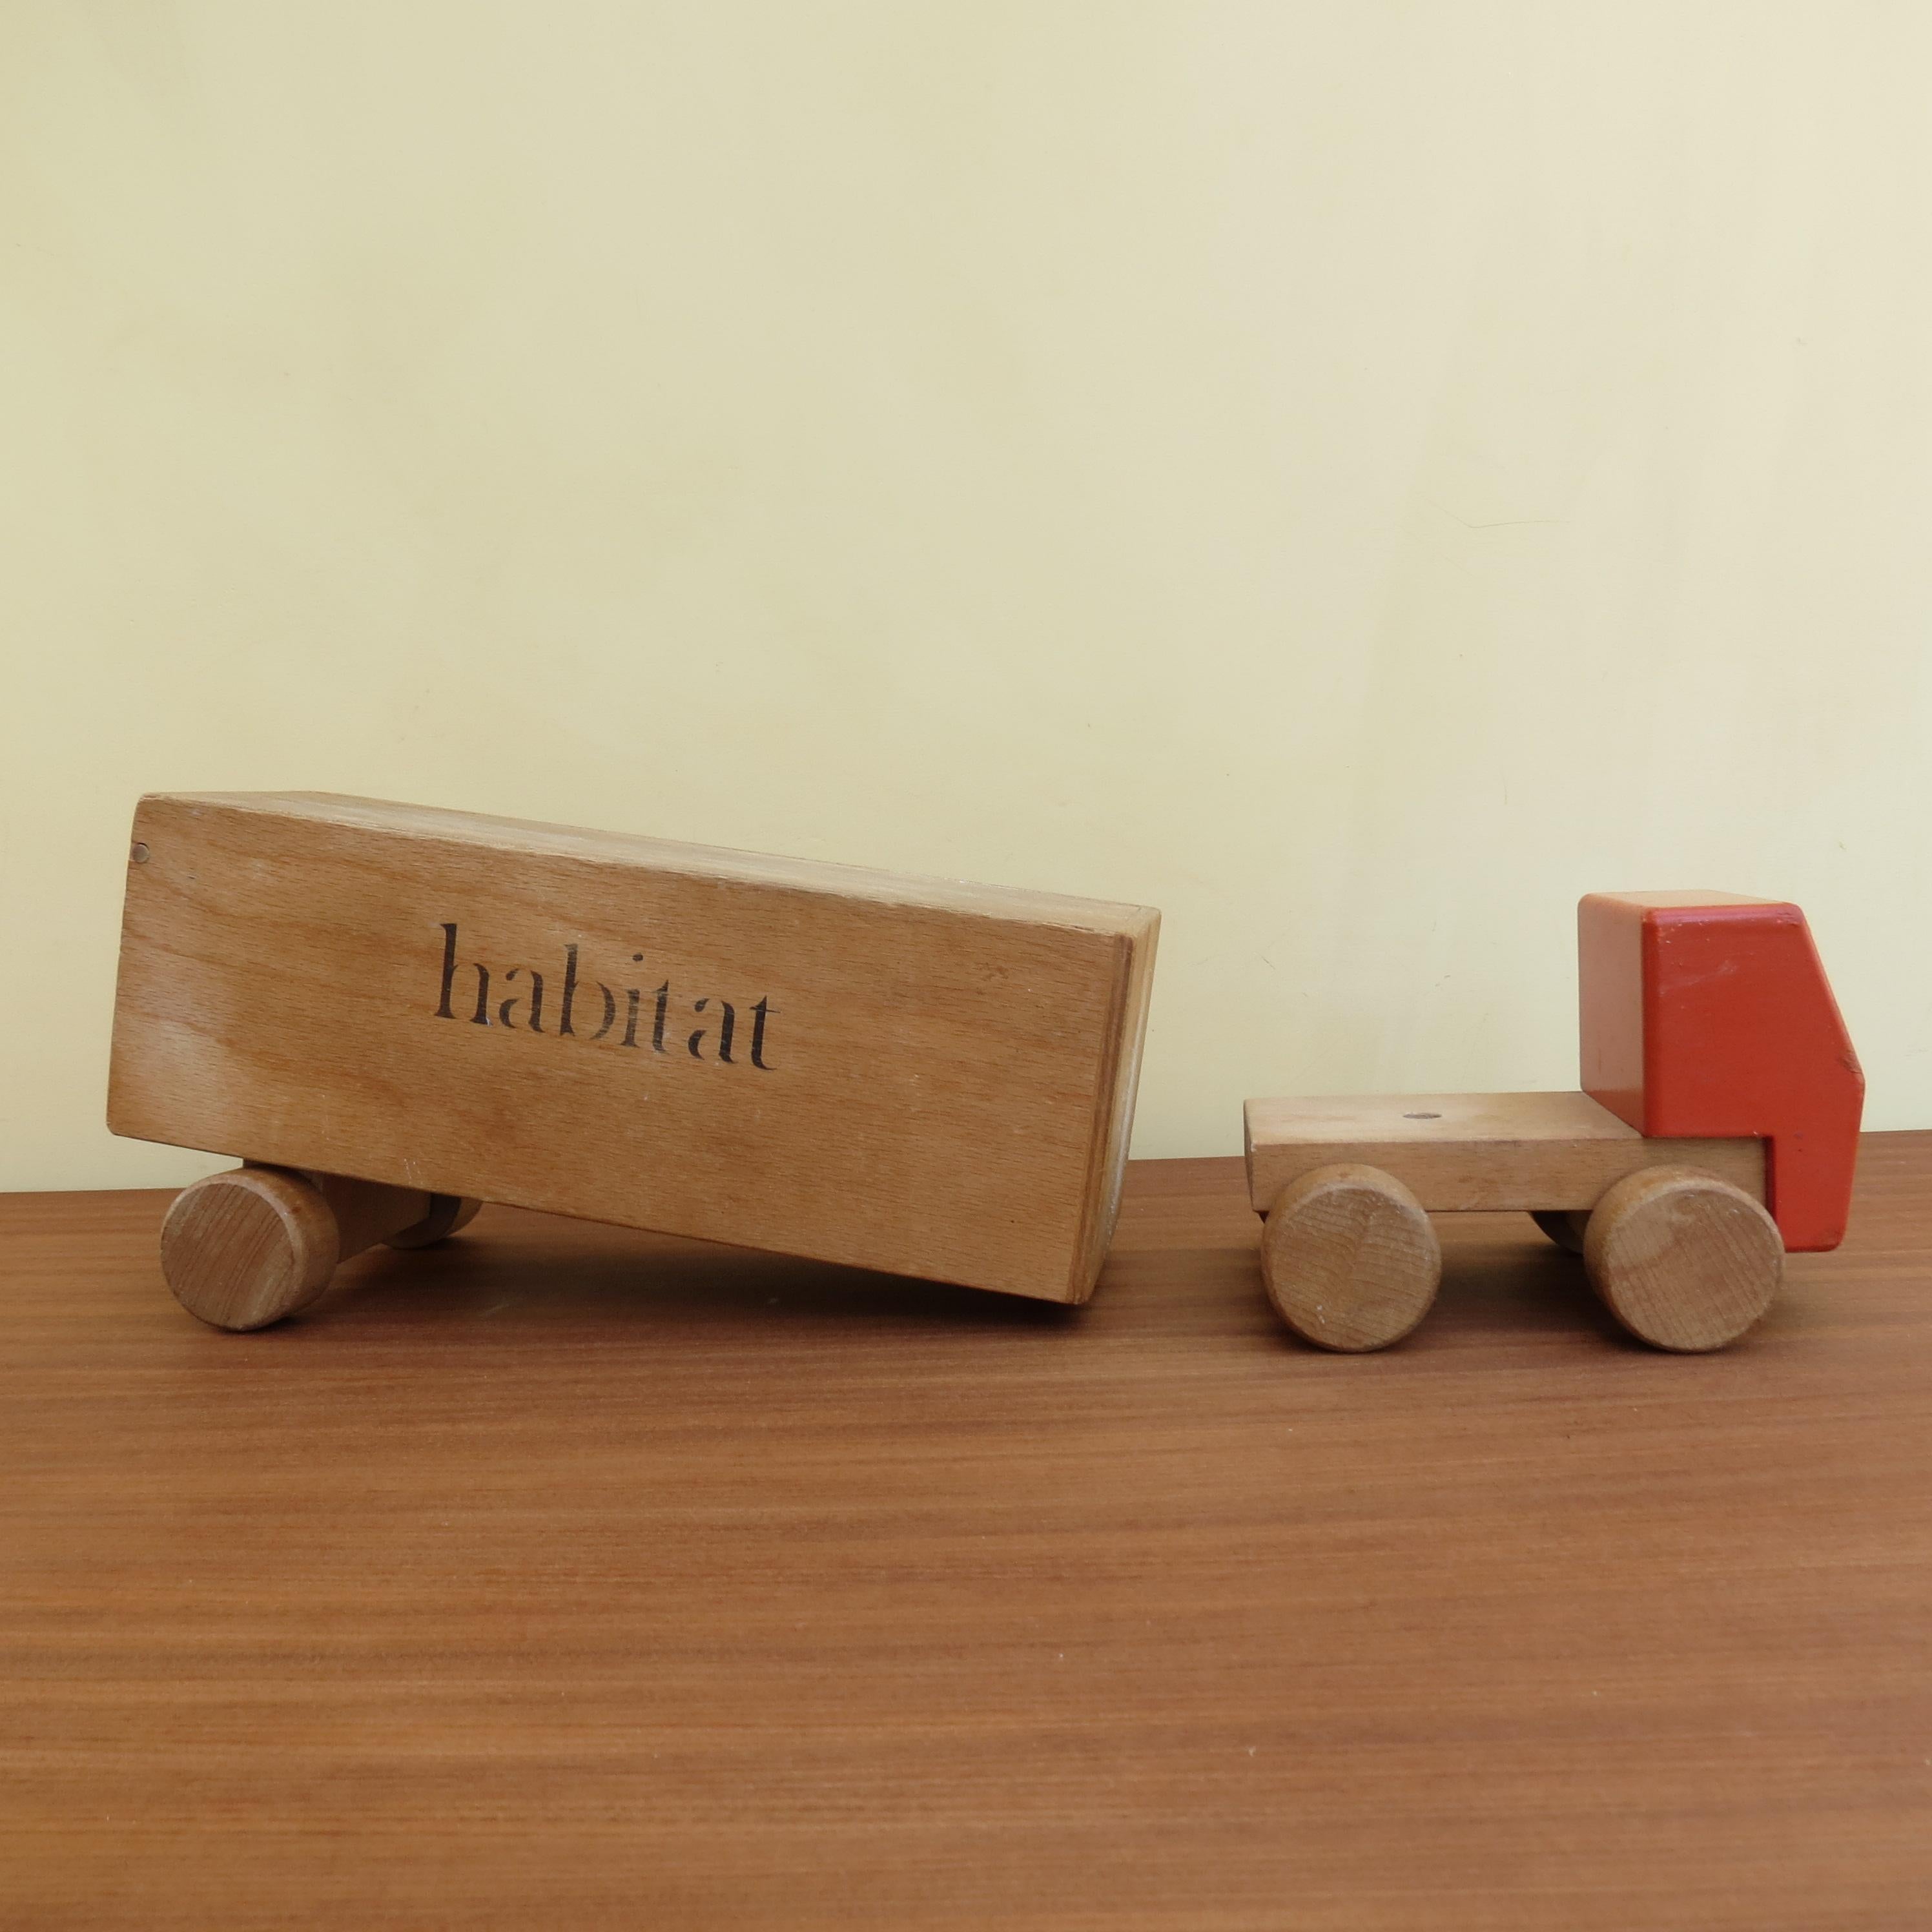 Plywood 1970s Vintage Advertising Toy Lorry for Habitat Wooden Toy Lorry by Ryk Heuff